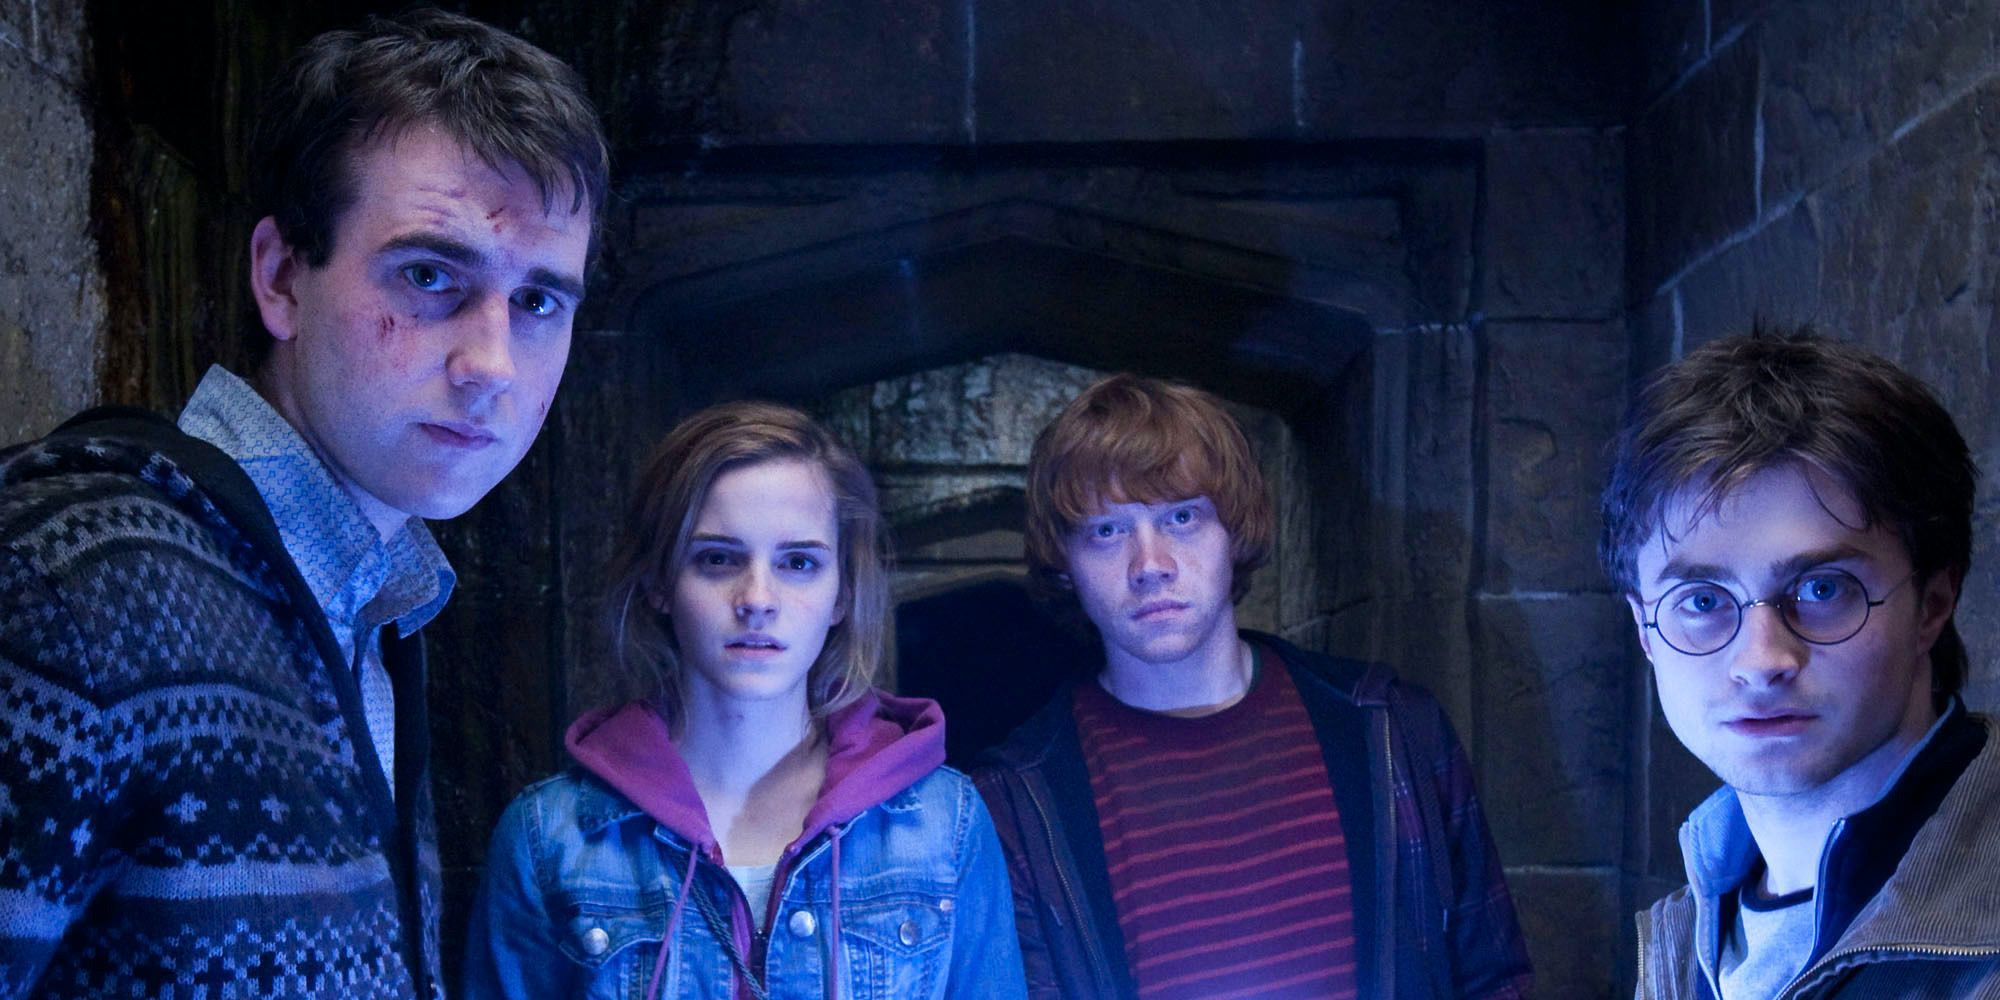 Neville leads Hermione, Ron, and Harry down the secret passage to the Room of Requirement in Harry Potter and the Deathly Hallows Part 2 